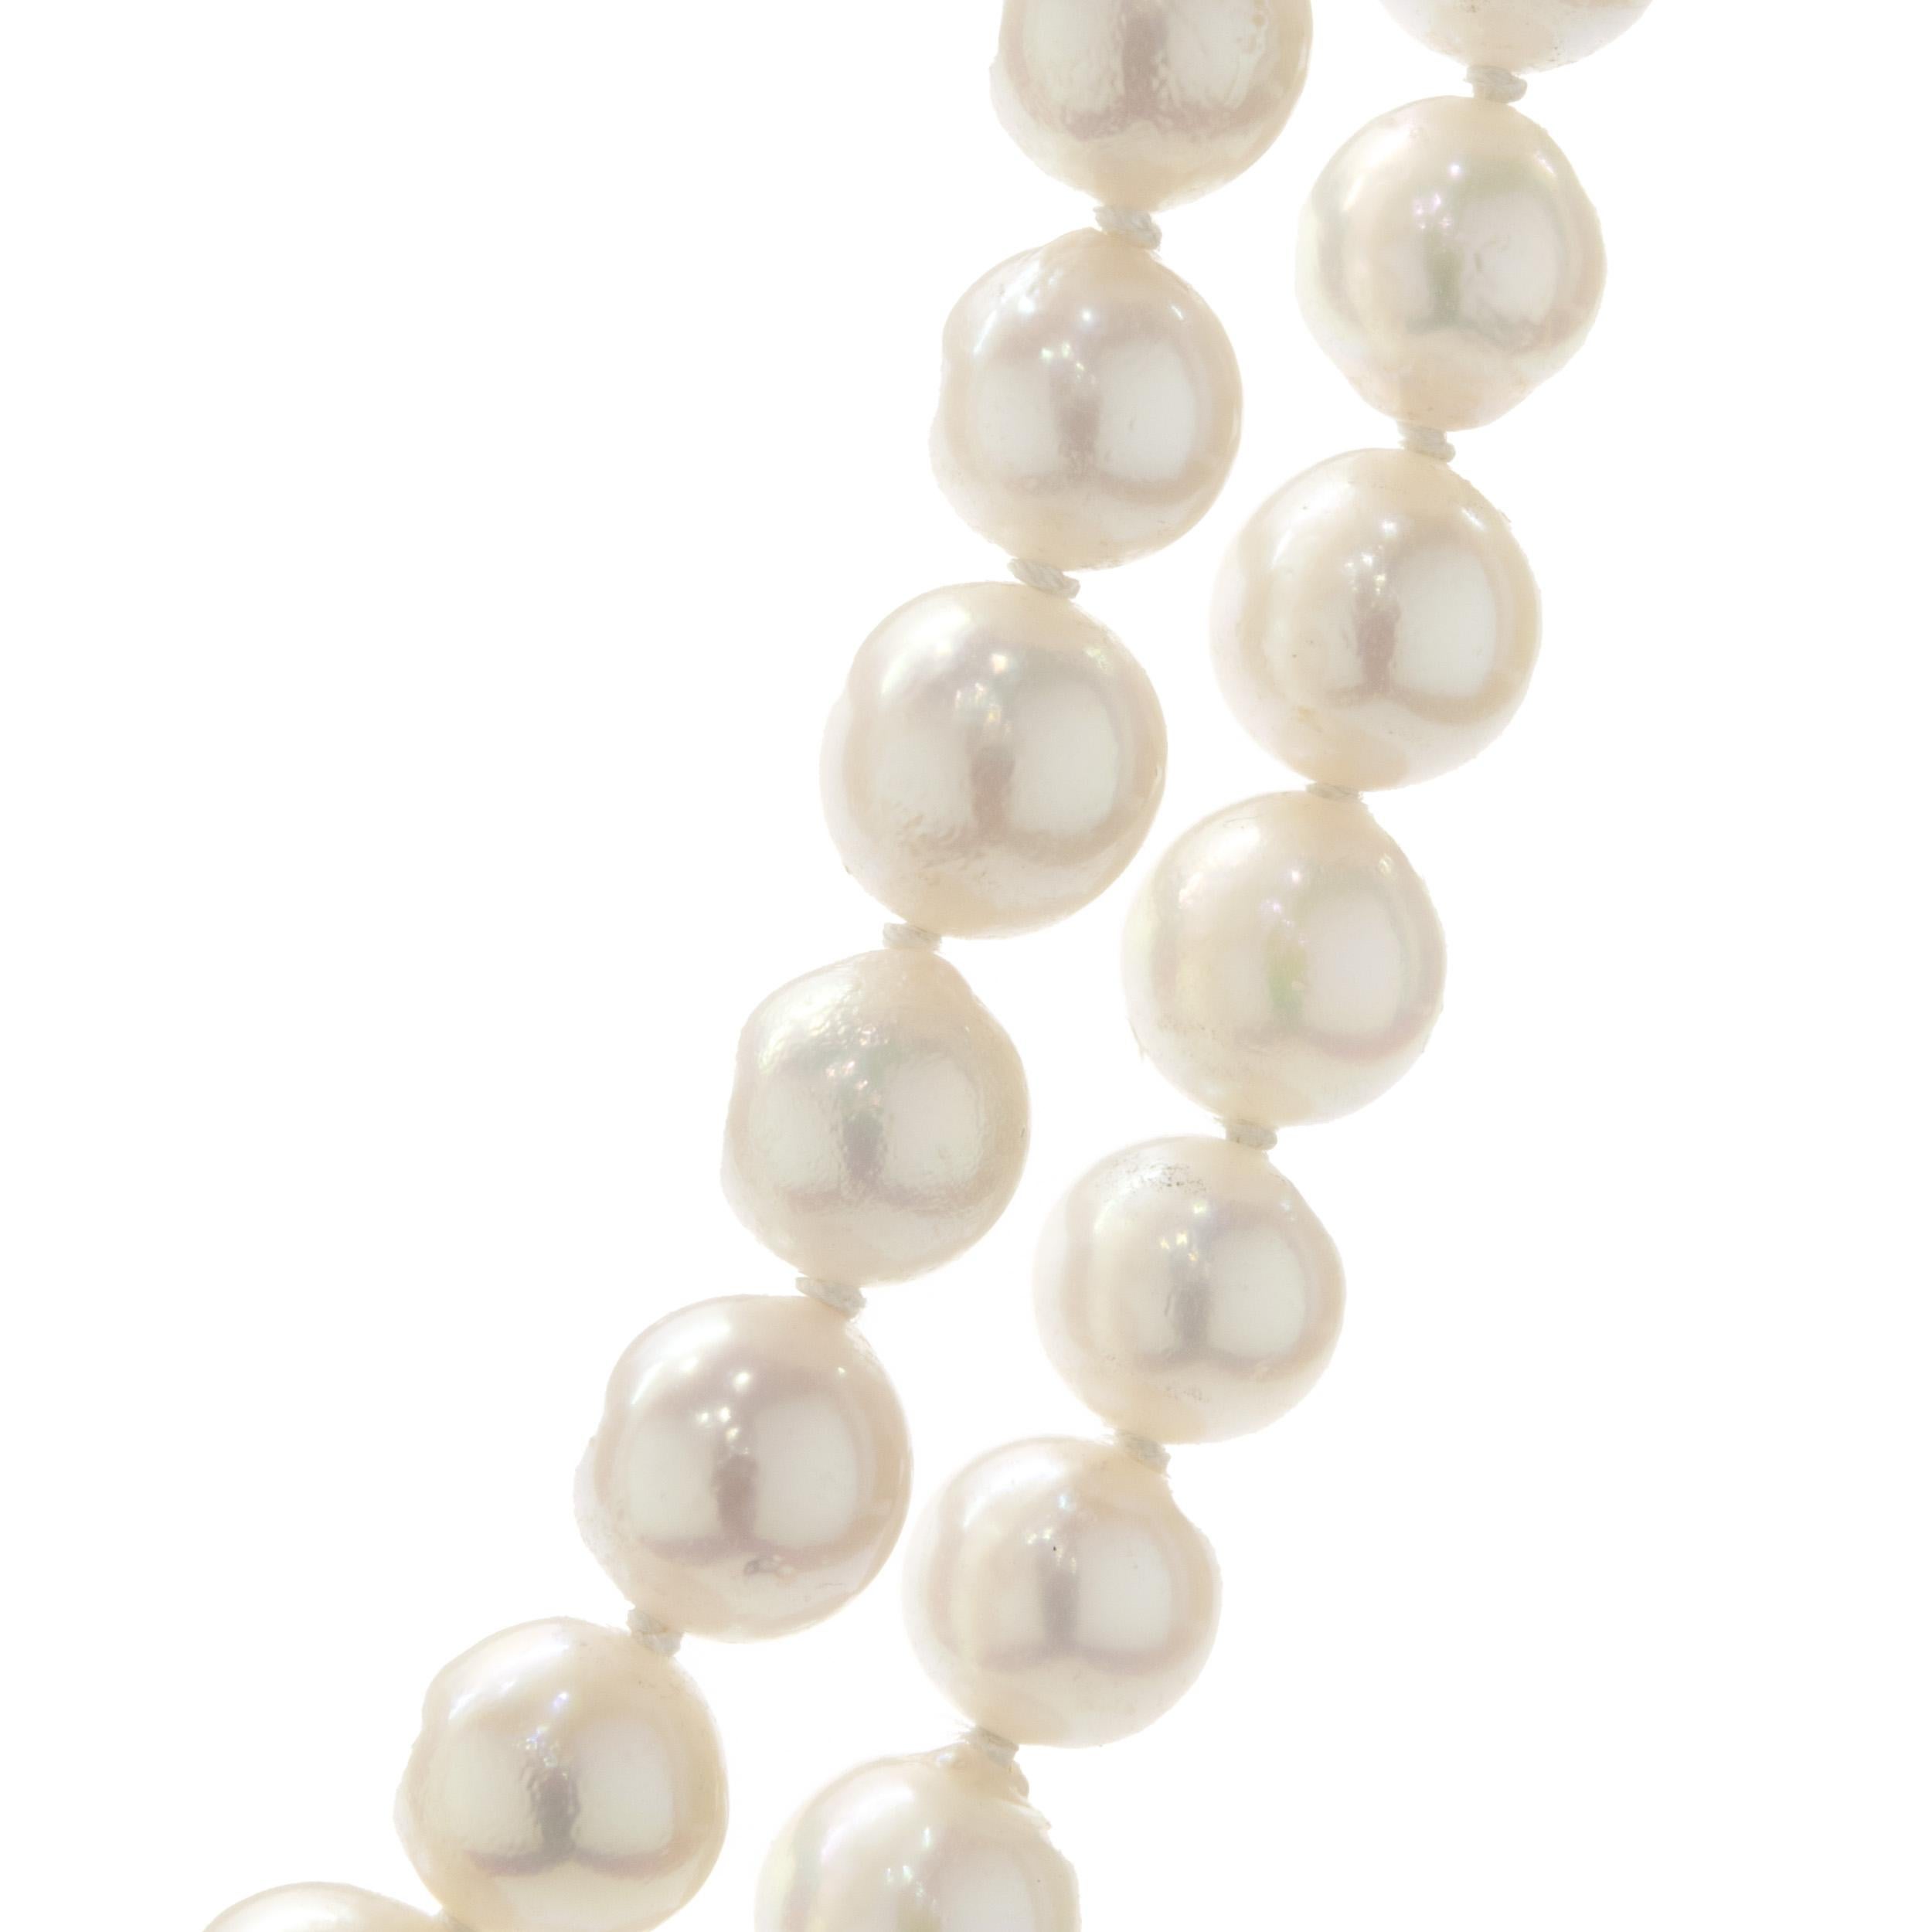 Designer: Custom
Material: 14K yellow gold
Diamonds: 19 round cut = .30cttw
Color: G
Clarity: VS
Pearl: 7mm semi-round Ivory pearls
Dimensions: necklace measures 16-inches in length
Weight: 57.00 grams
